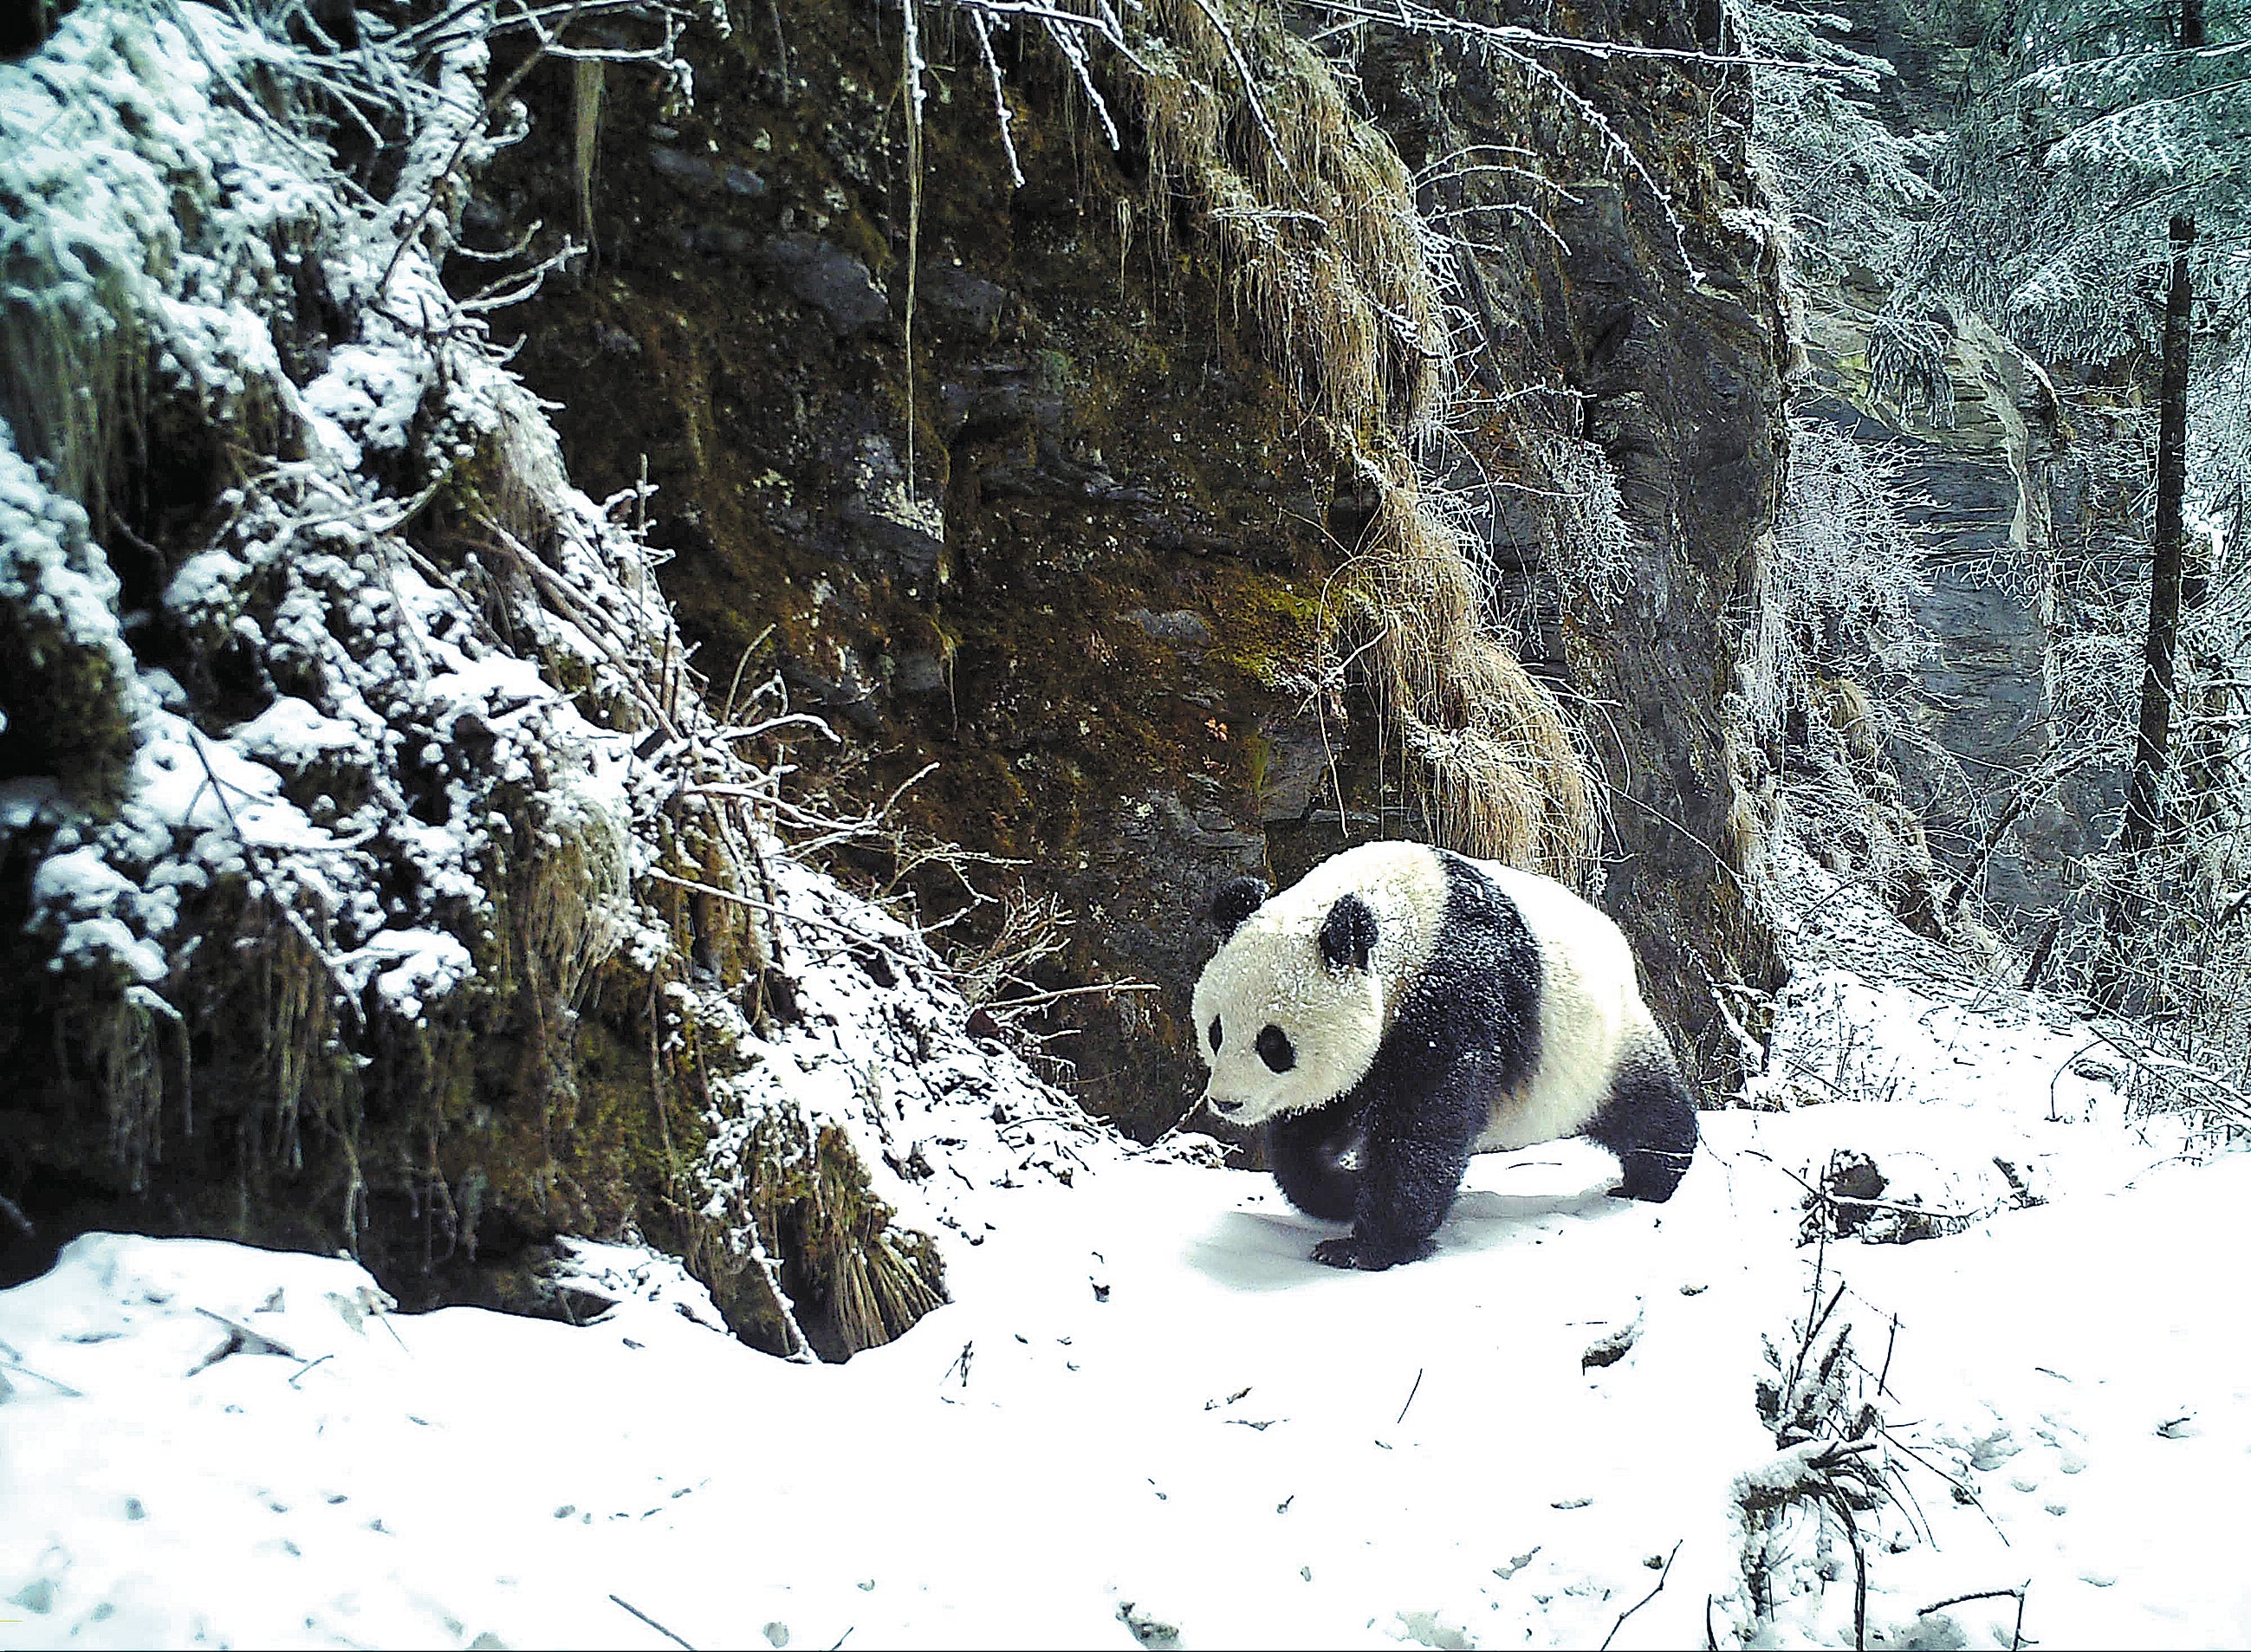 A wild giant panda is photographed in Beichuan, Sichuan province